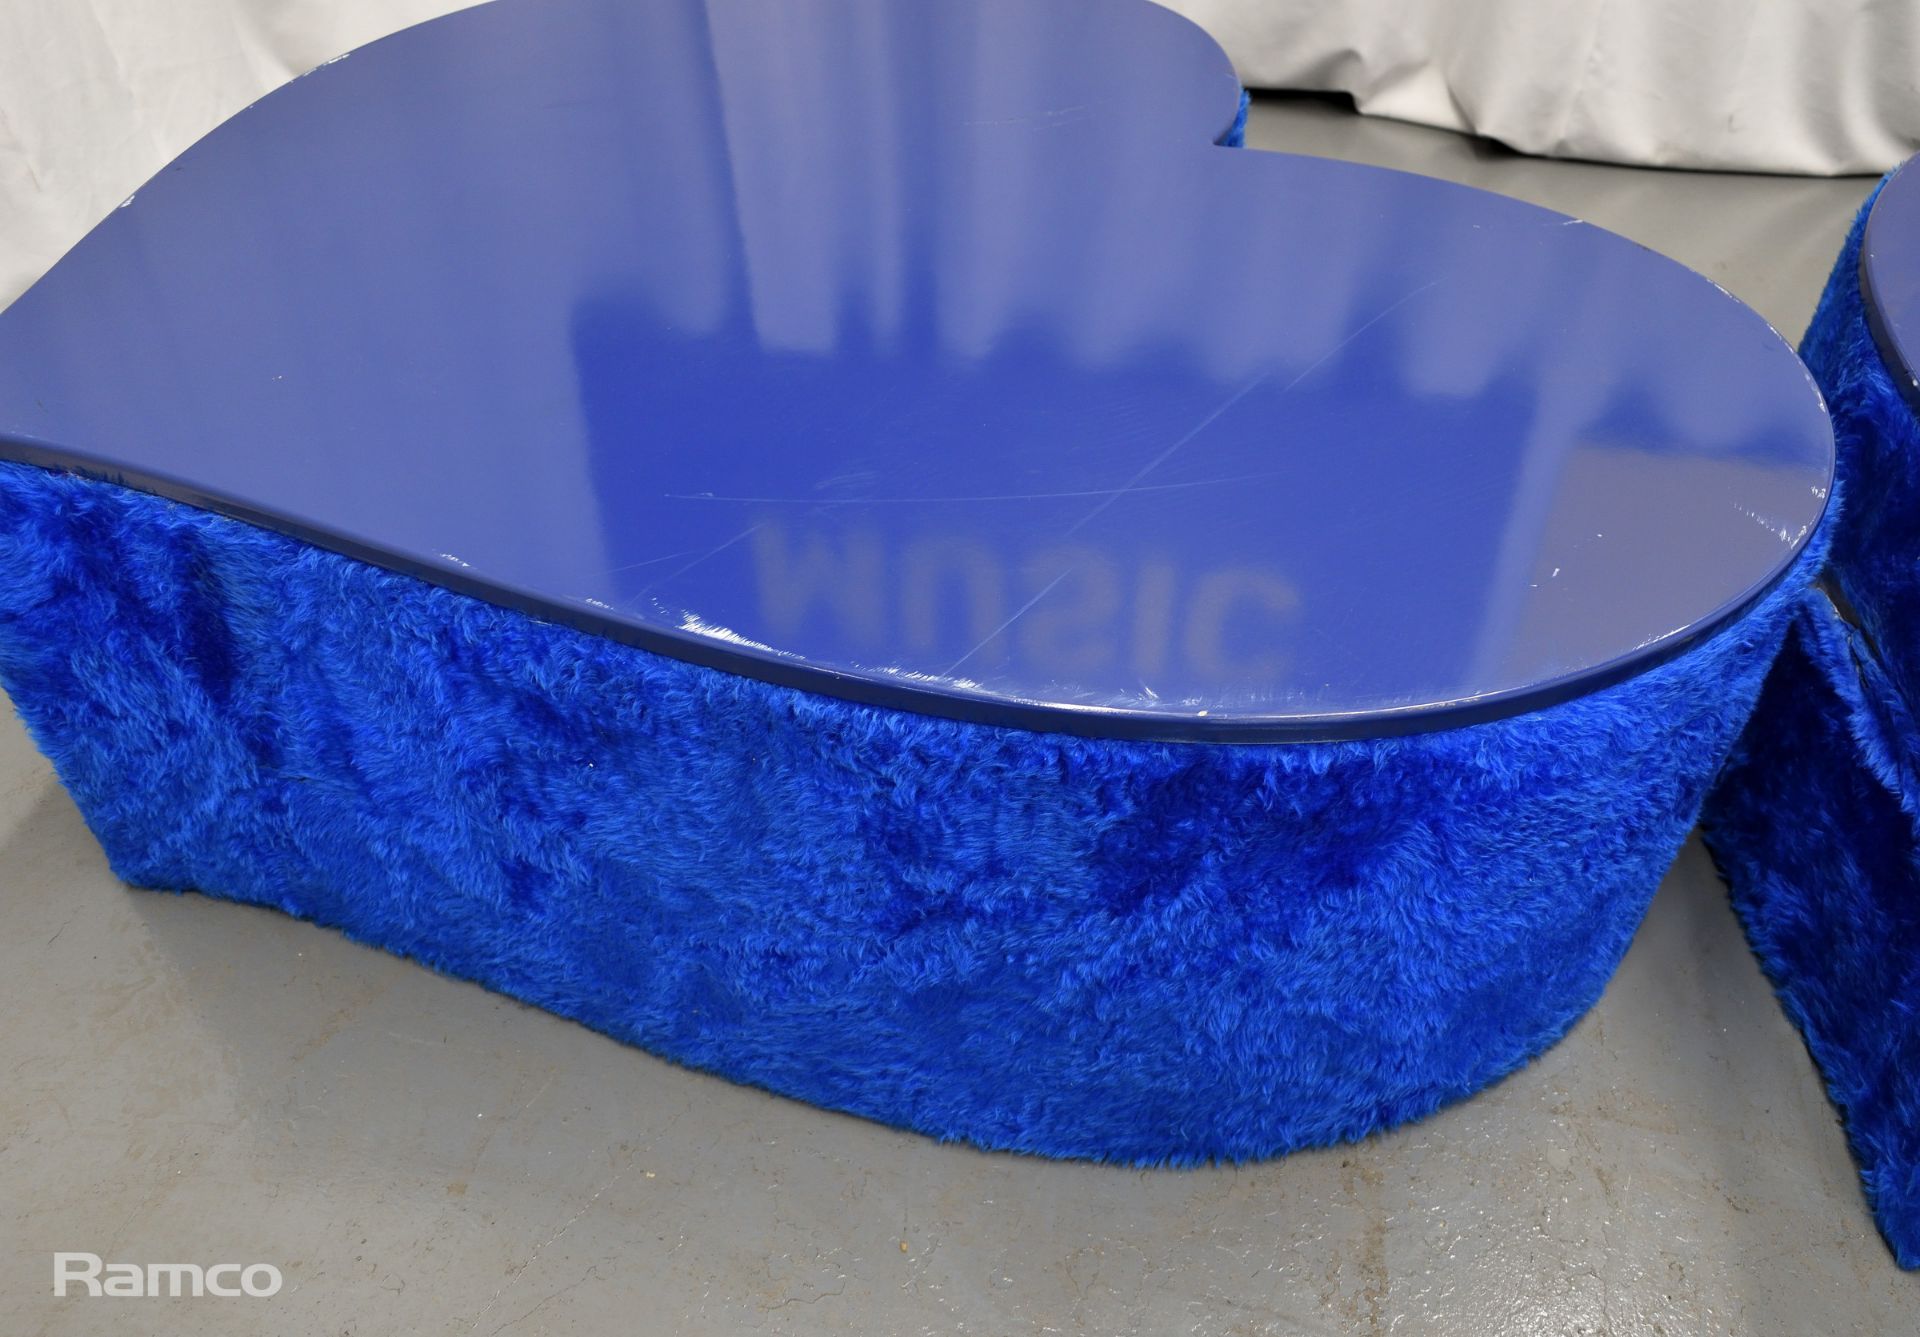 4x Asymmetrical heart shaped blue fur-covered wooden tables from countries' seating area - Image 7 of 18